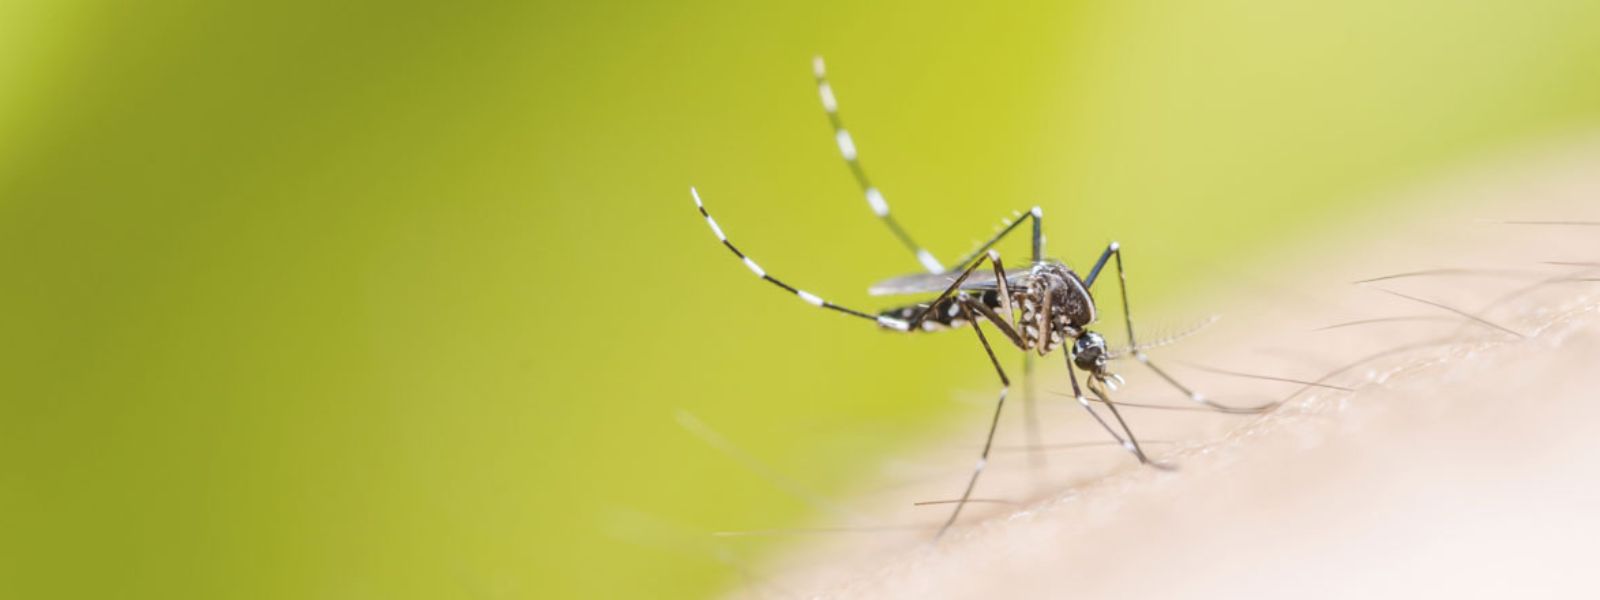 Friday every week set aside for mosquito control